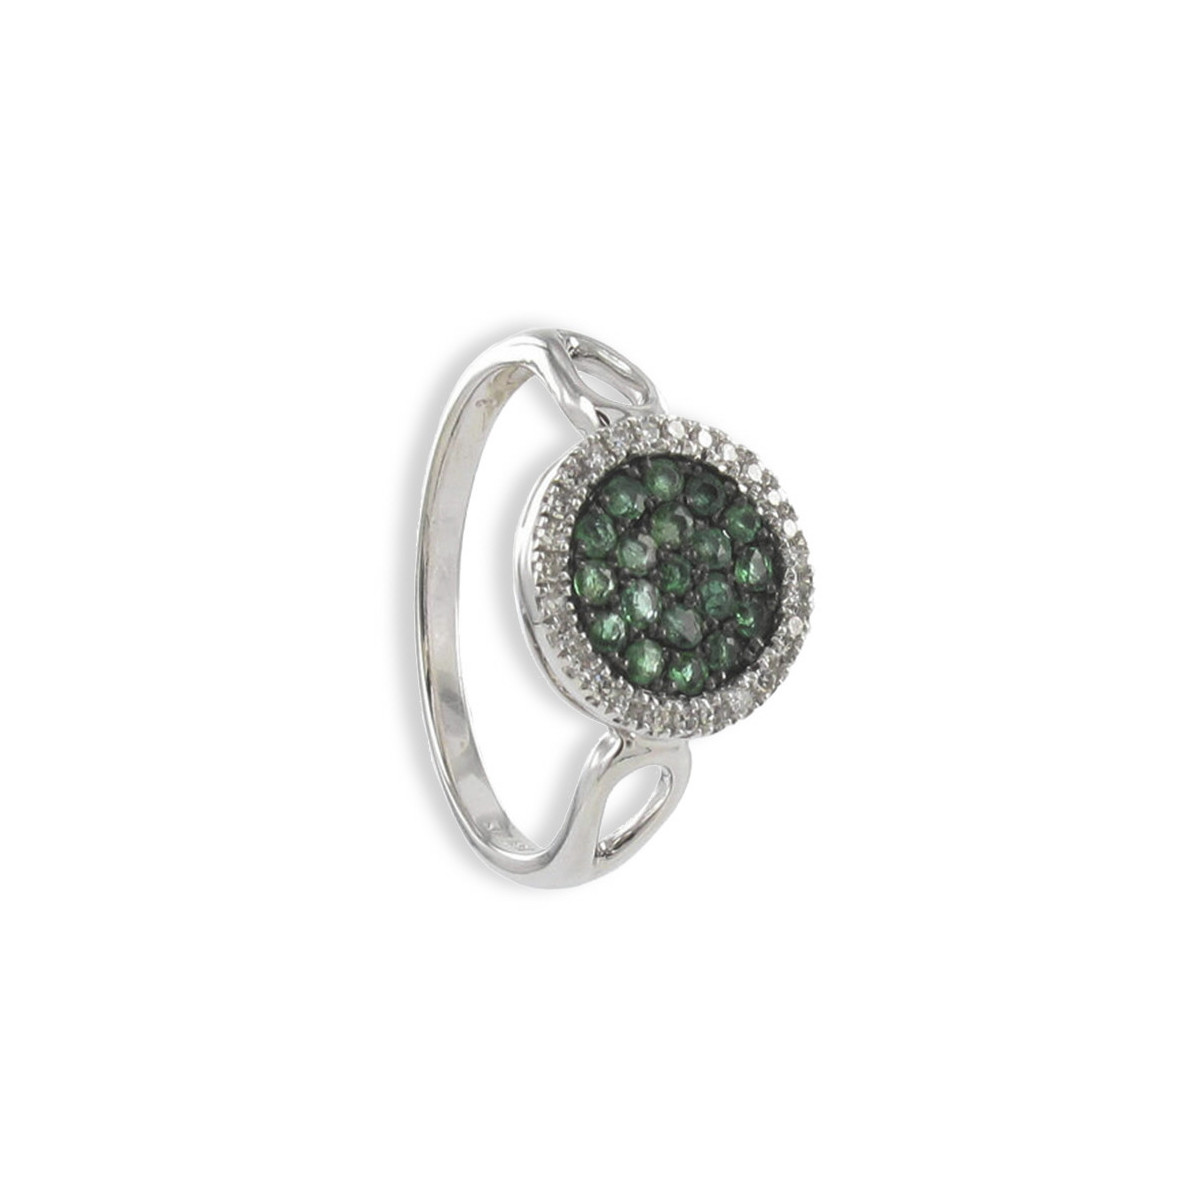 DESIGN RING WITH EMERALDS AND DIAMONDS